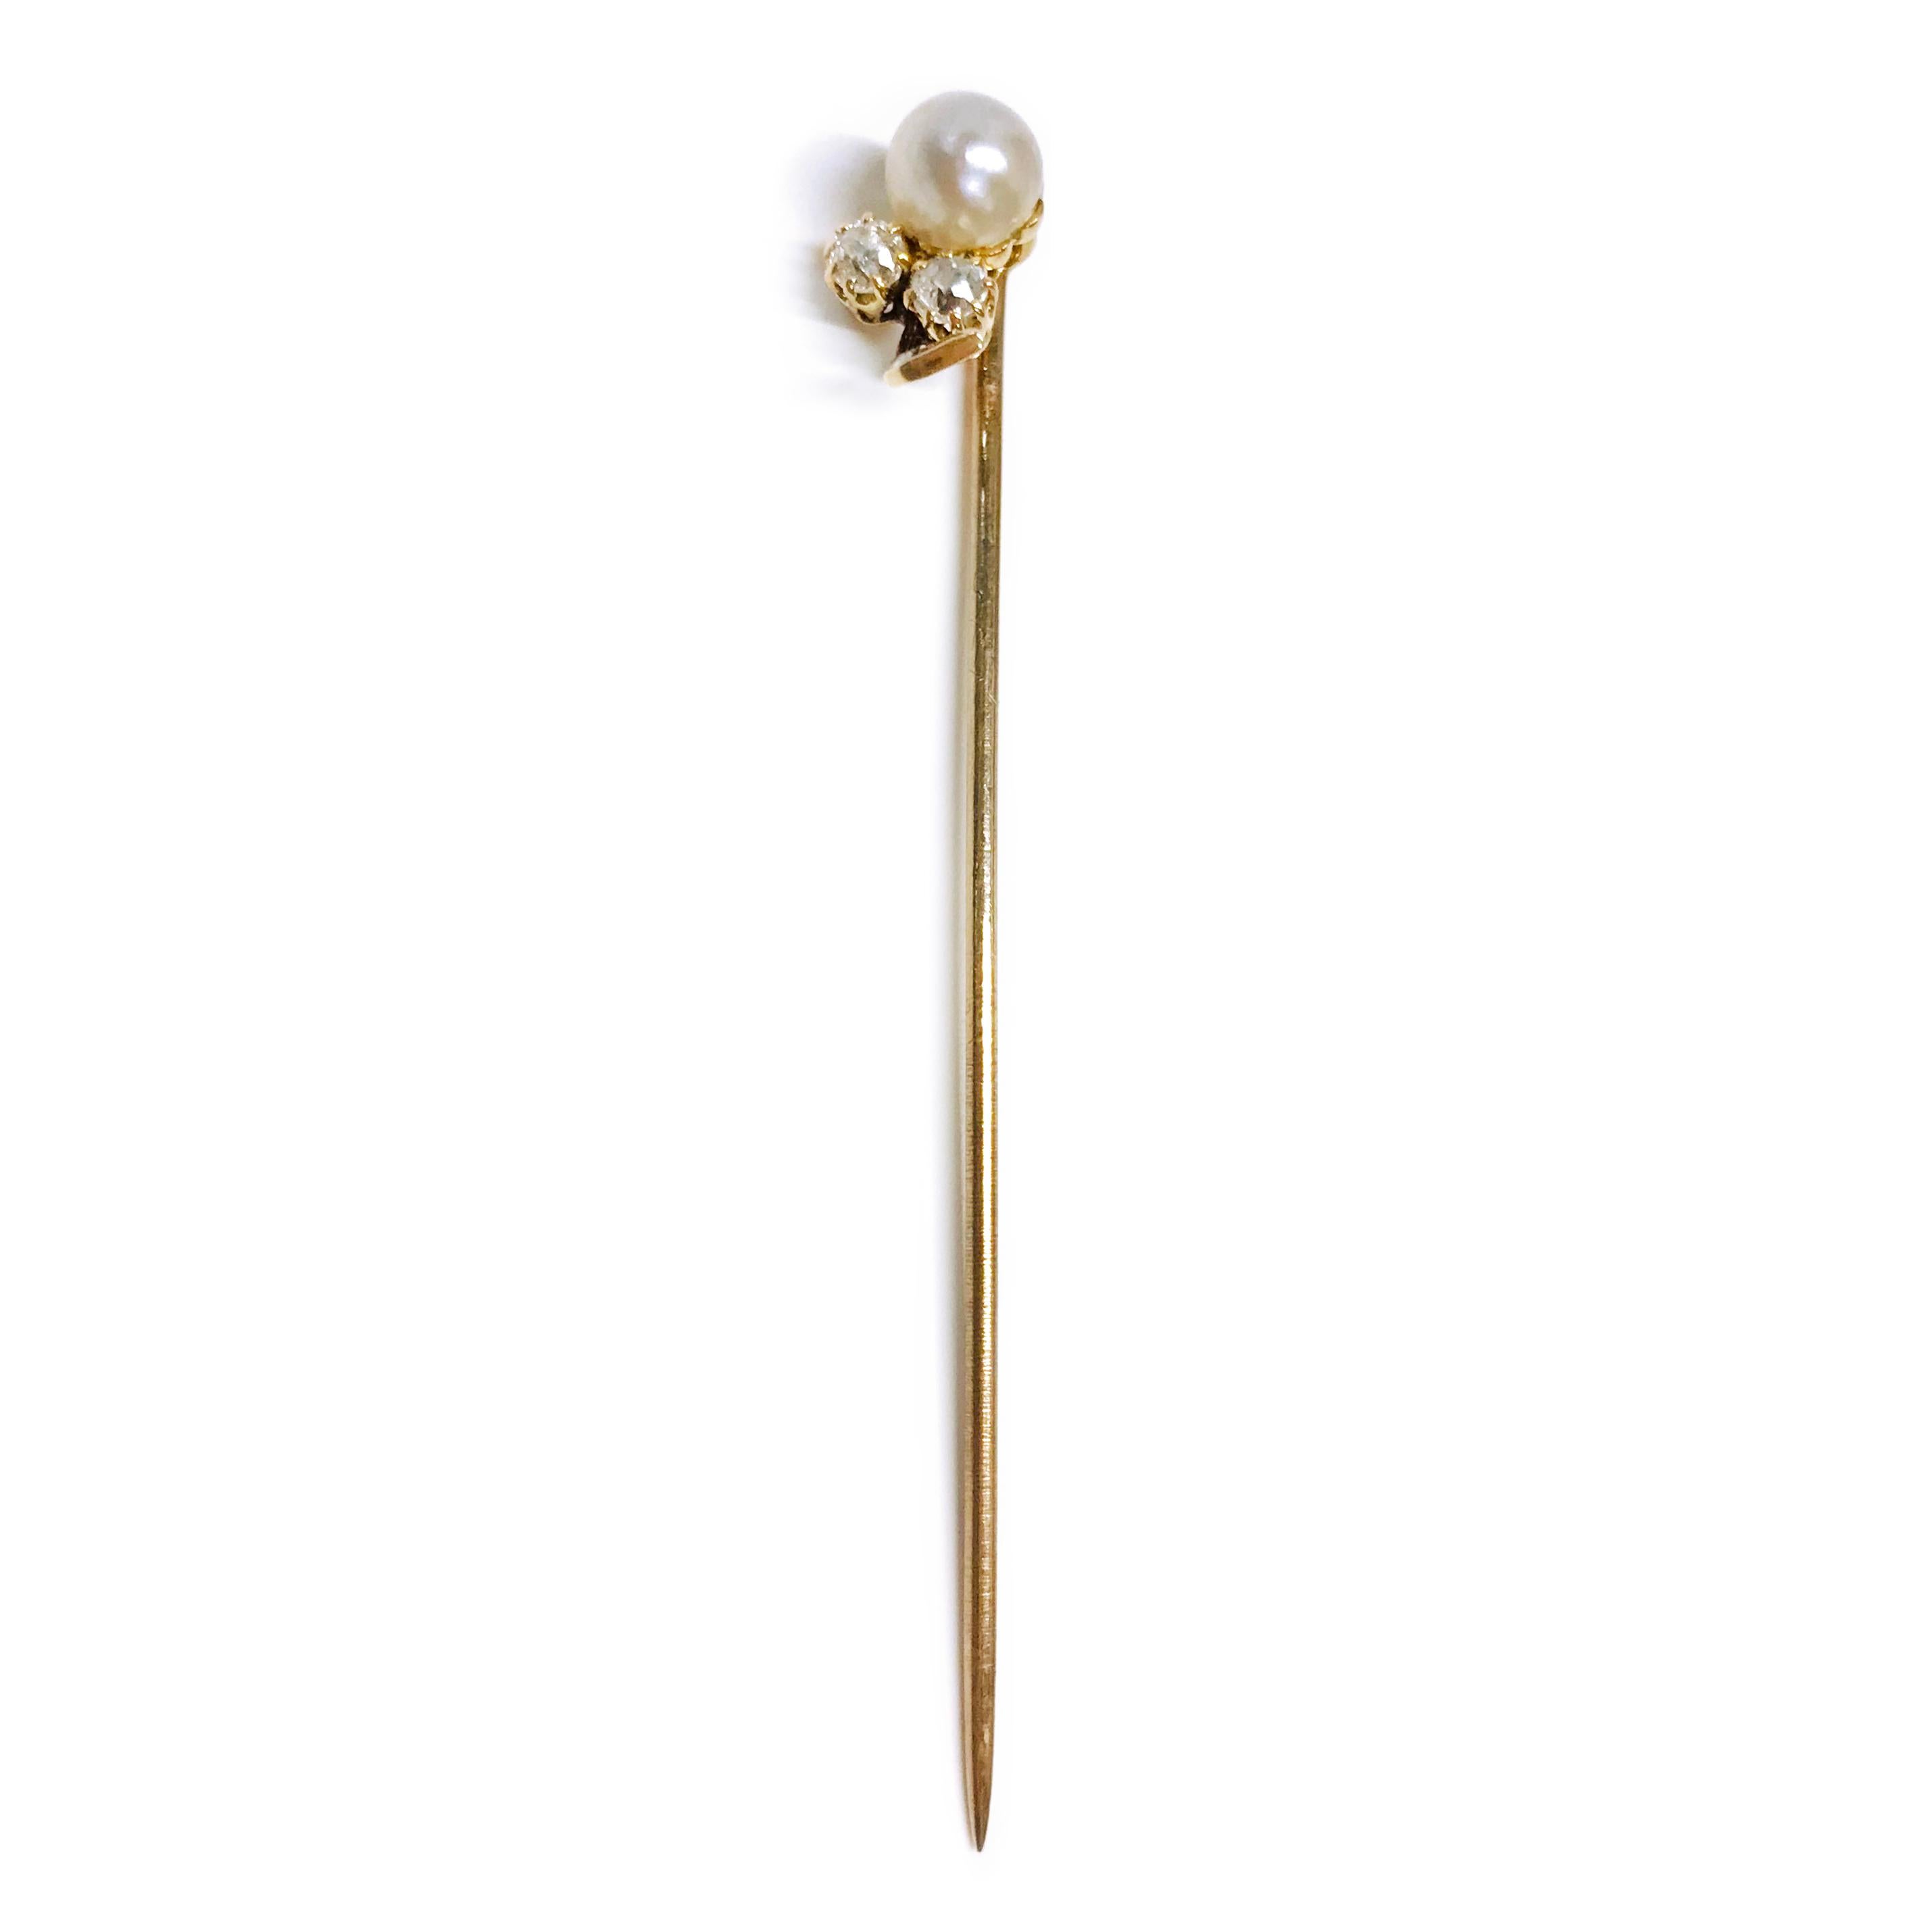 14 Karat Pearl Diamond Hat Pin. This lovely pin features a 6mm round pearl, two 3mm round brilliant-cut prong-set diamonds, and one small round bead-set accent diamond. The total carat weight of the diamonds is 0.20ctw. A simply elegant piece with a